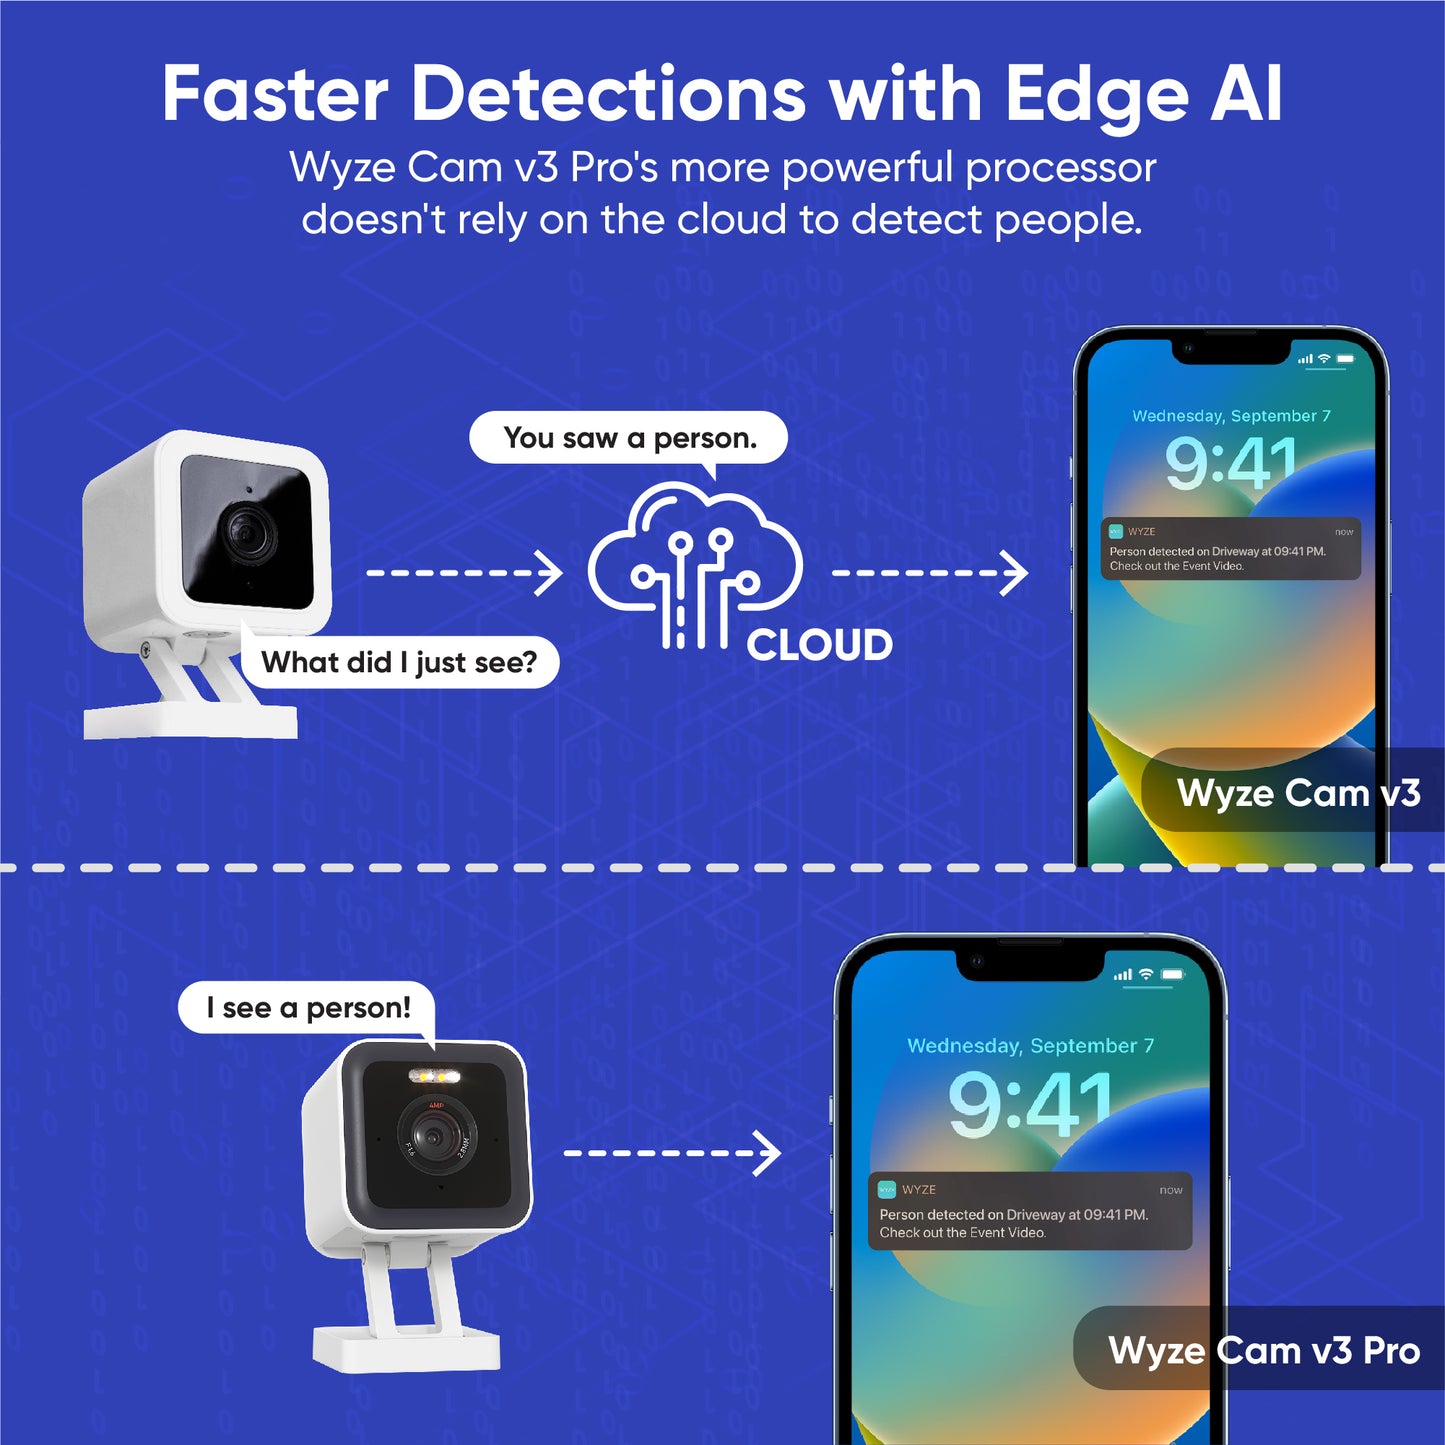 Wyze Cam cloud flow image. Text overlay "Faster Detections with Edge AI."